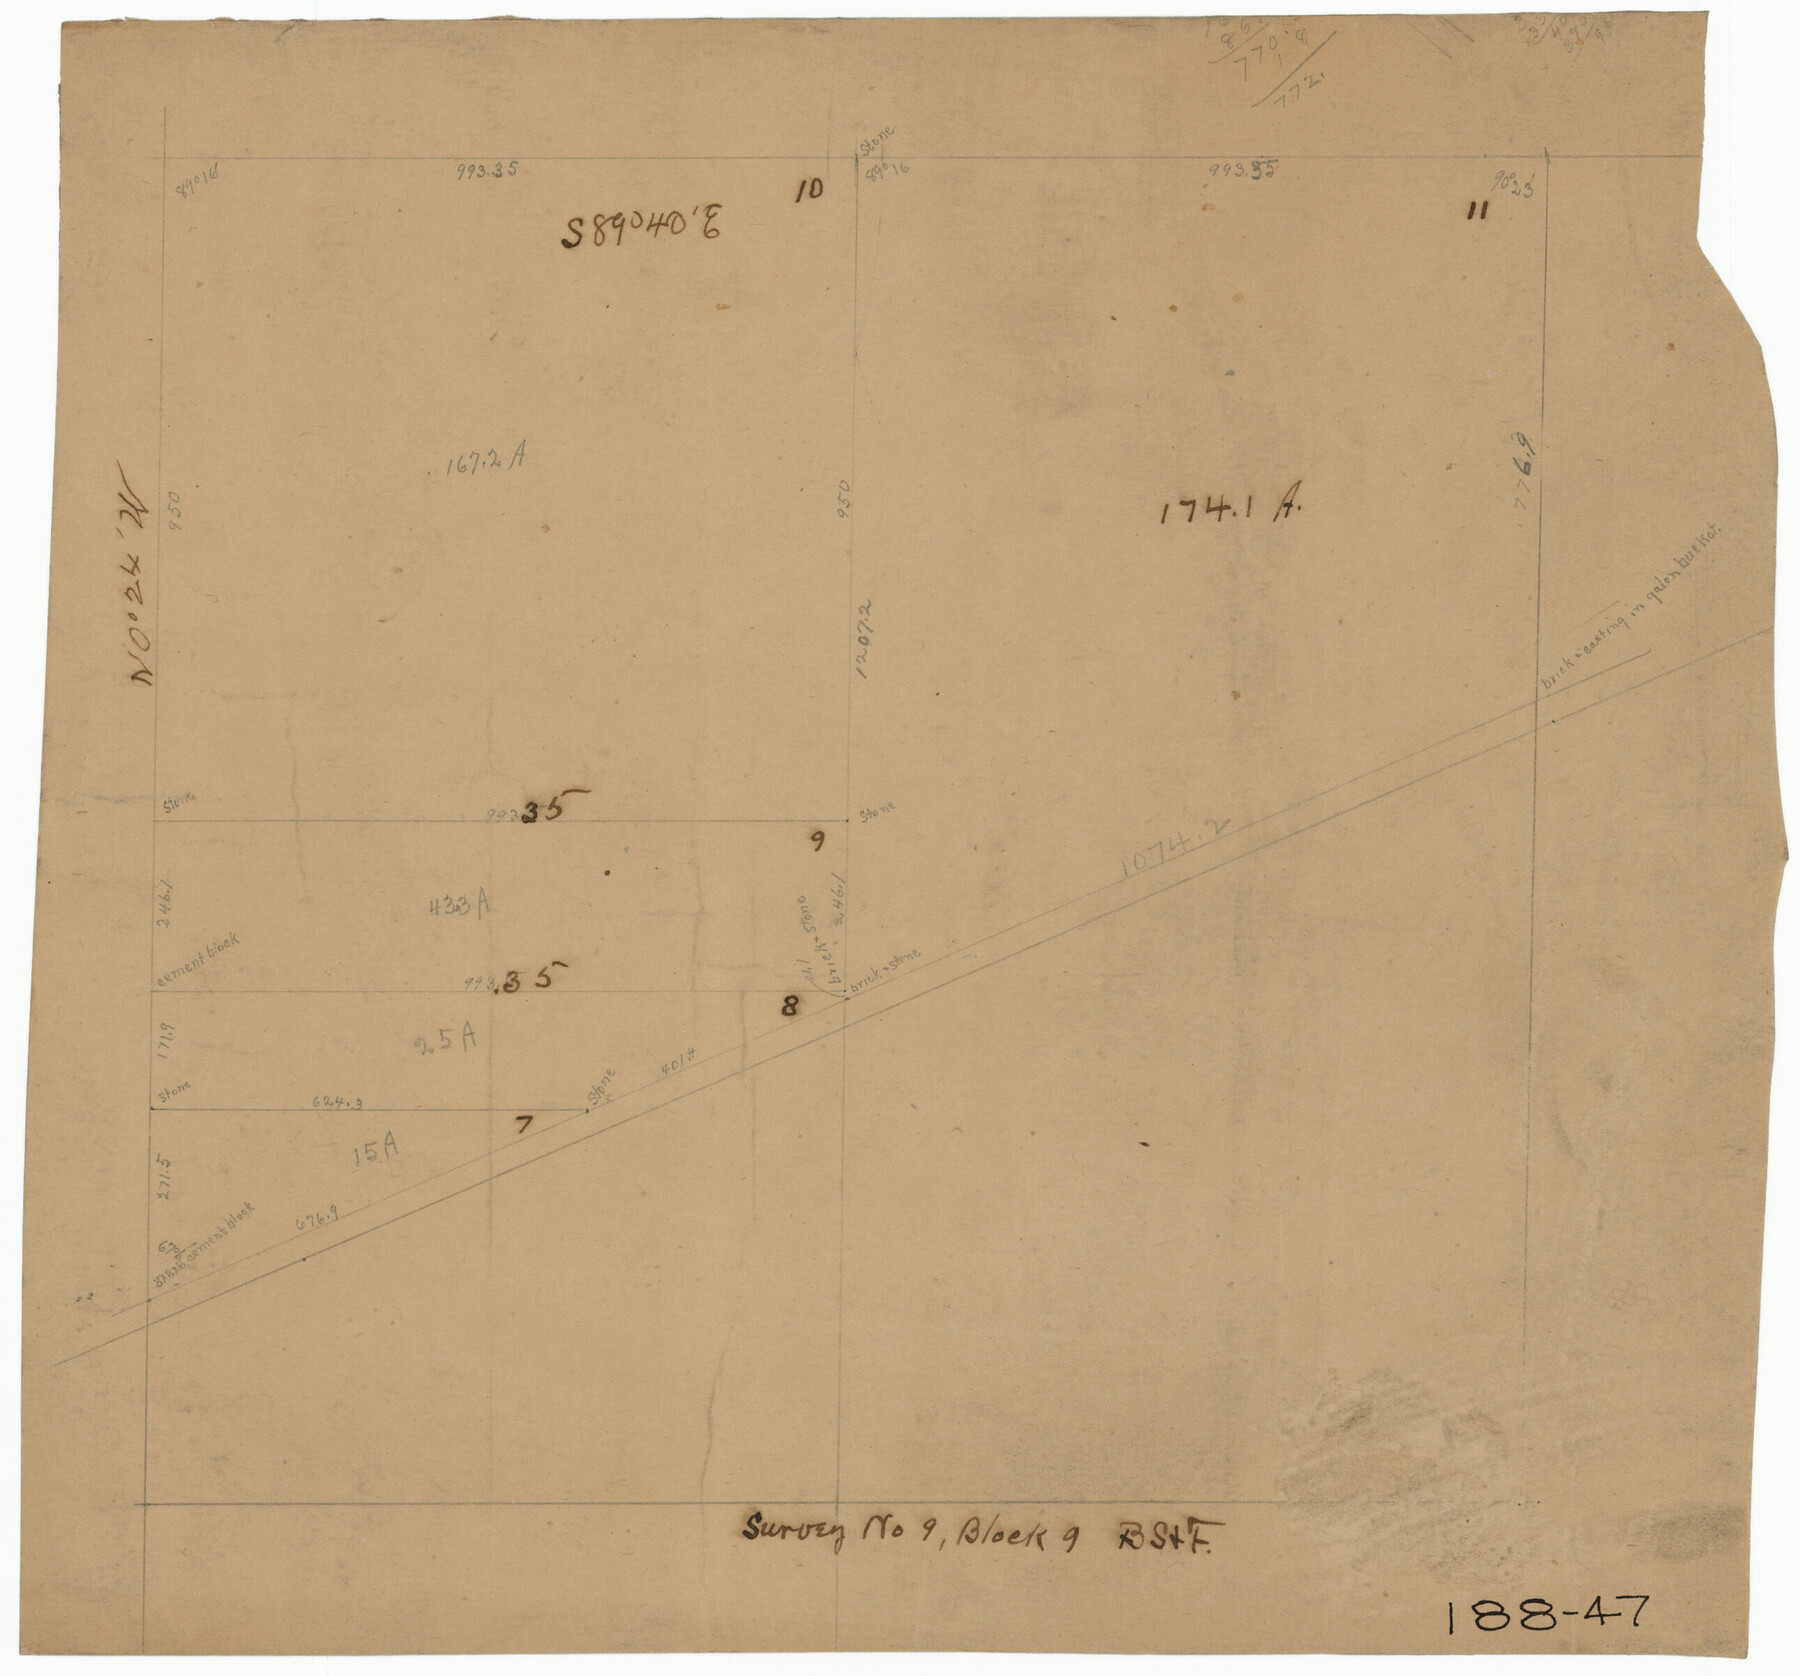 91711, [Sketch showing B. S. & F. survey number 9, section 9], Twichell Survey Records